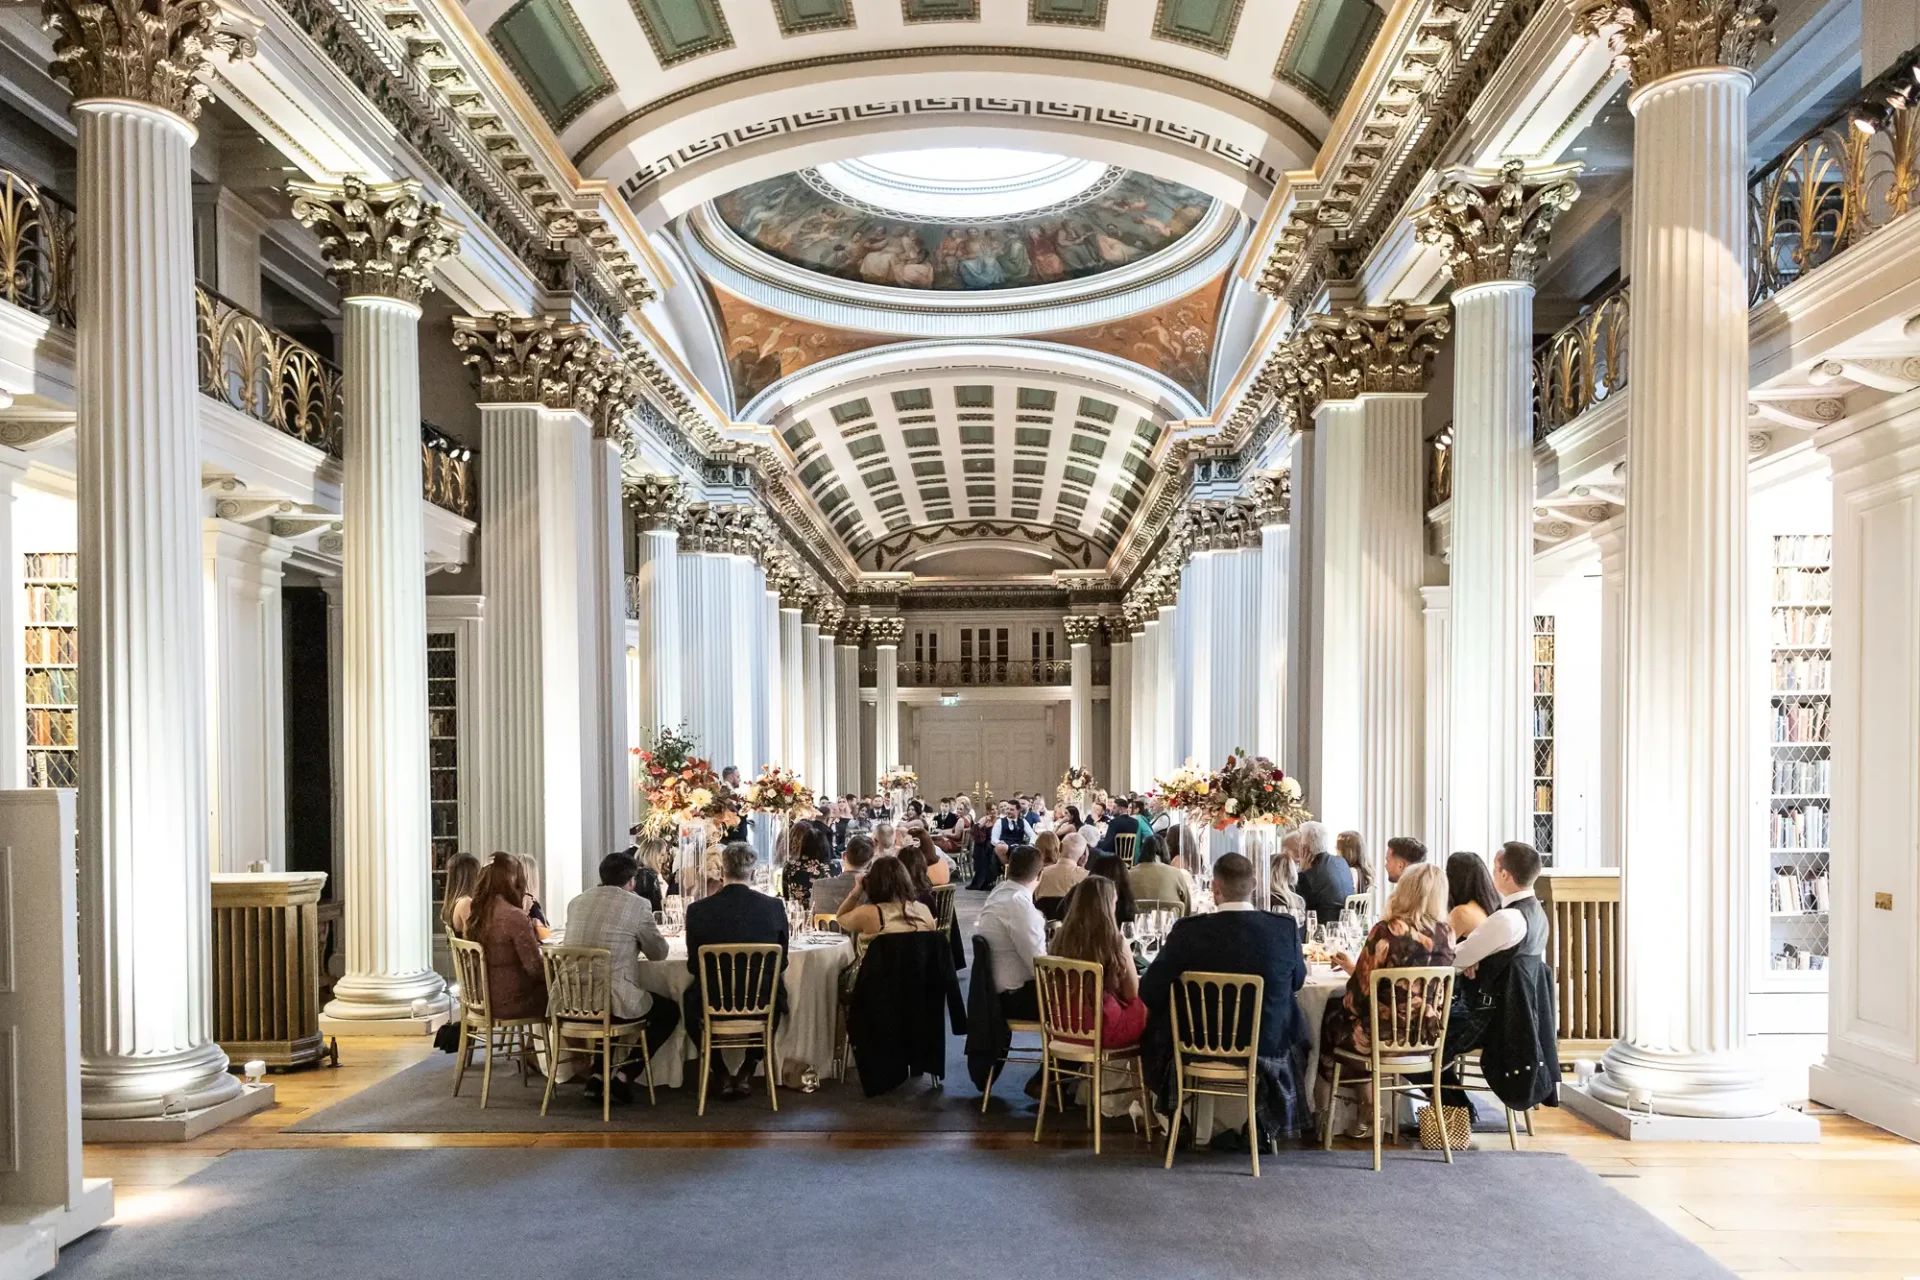 Guests seated at a formal event in an ornate hall with rows of columns and a detailed ceiling.